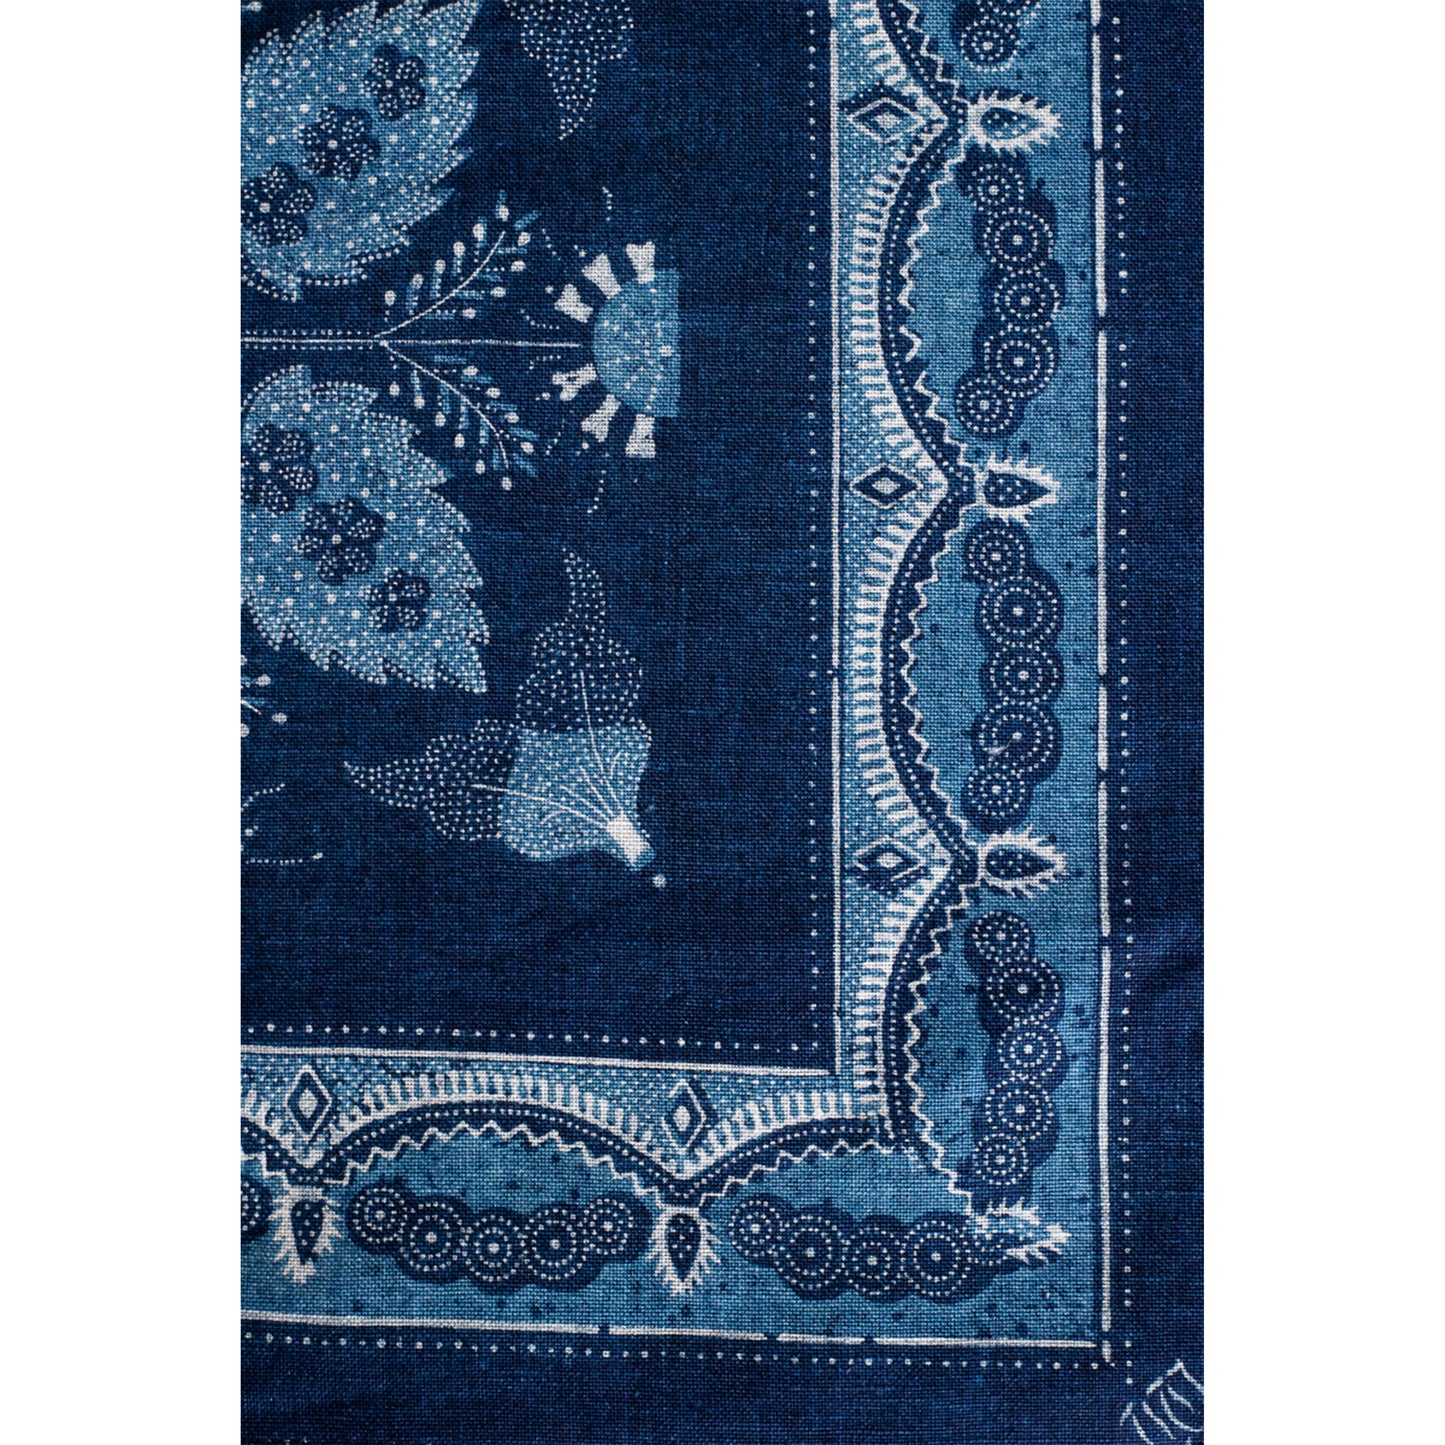 Austria, Karl and Maria Wagner, Blaudruck Schmetterling Print (two-toned) Table Runner